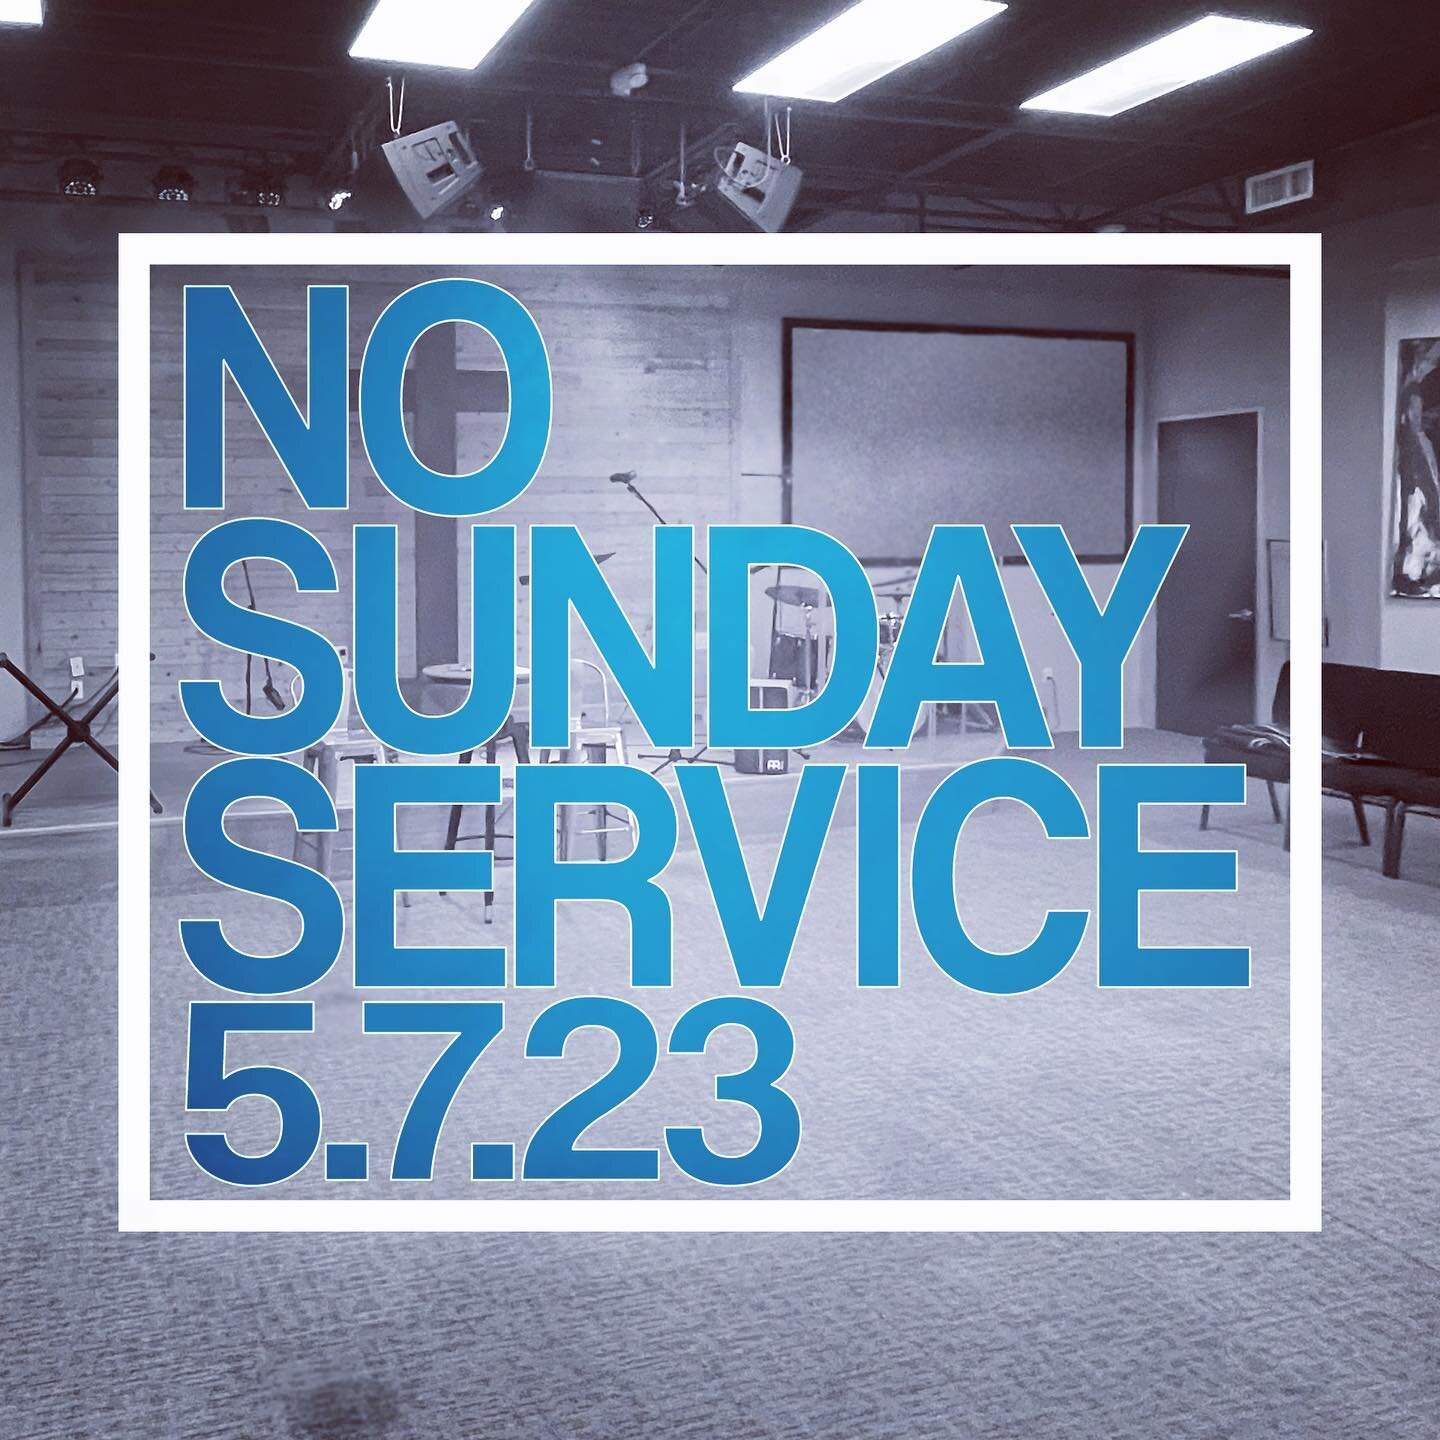 There will be no services this Sunday, May 7th, as our church family celebrates our annual retreat. See you next week!